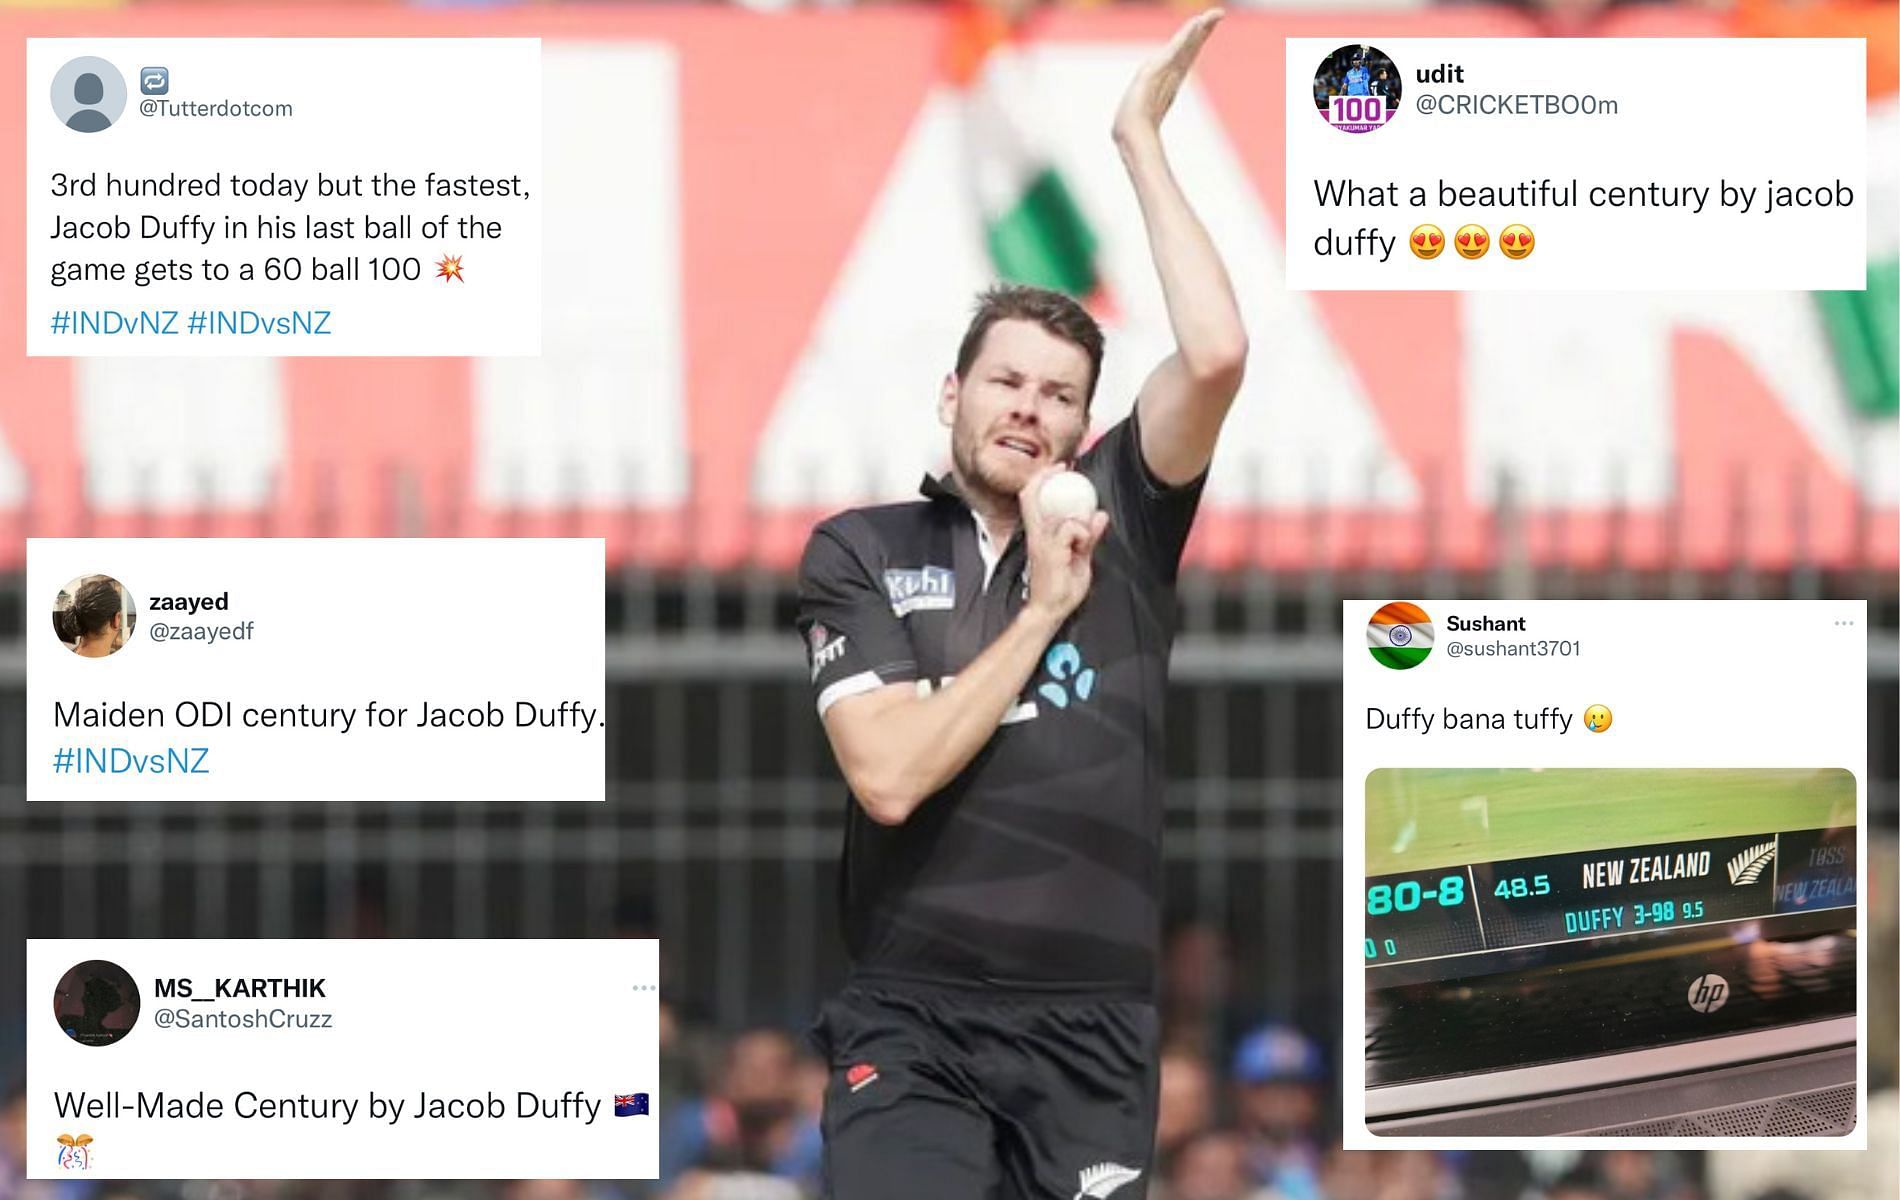 Jacob Duffy finished with figures of 3/100 in IND vs NZ 3rd ODI. (Pics: Twitter)